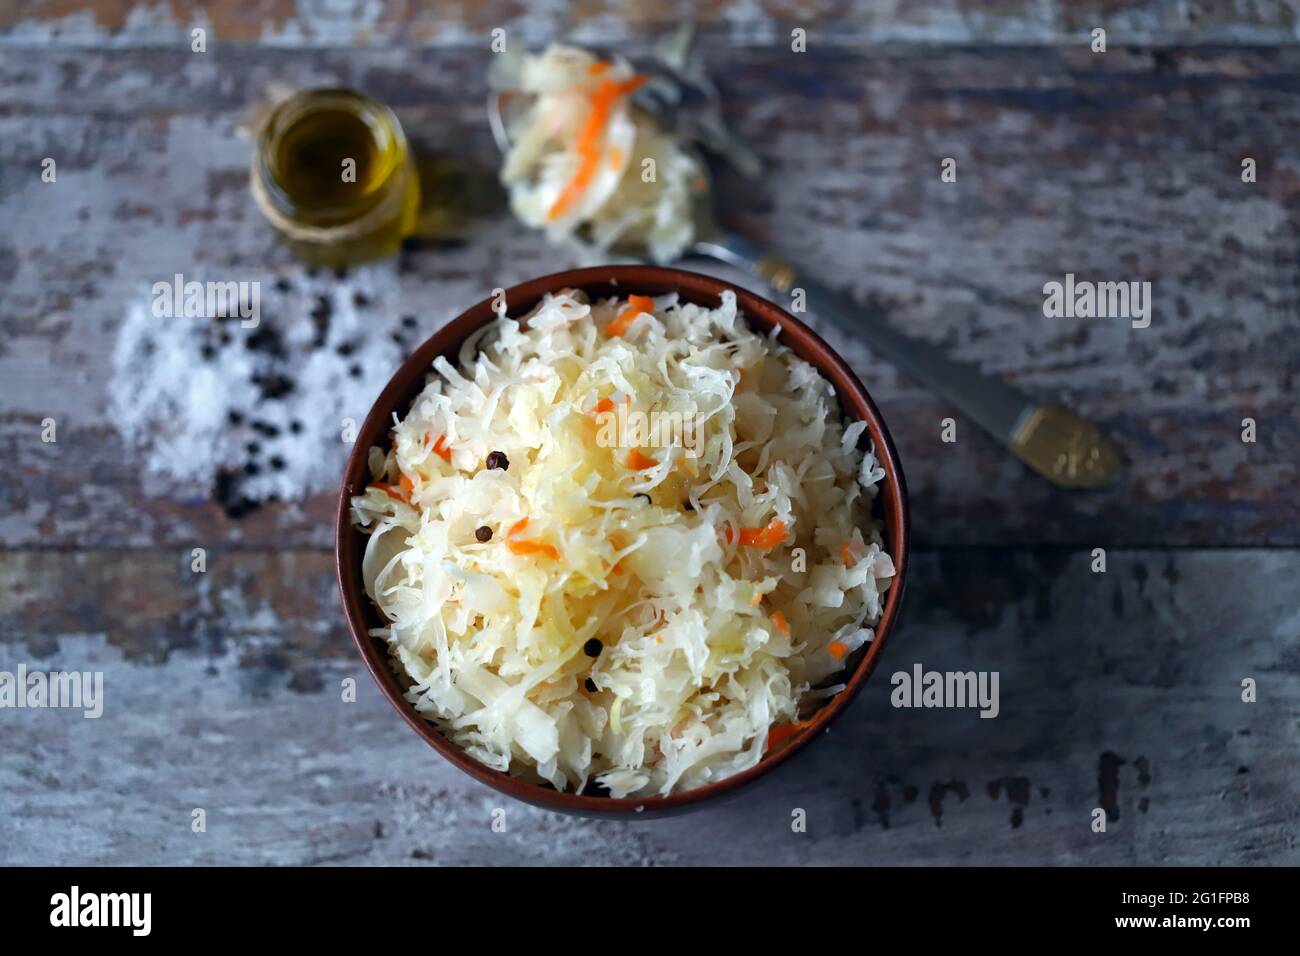 Sauerkraut in a bowl. Probiotics and fermented foods. Stock Photo